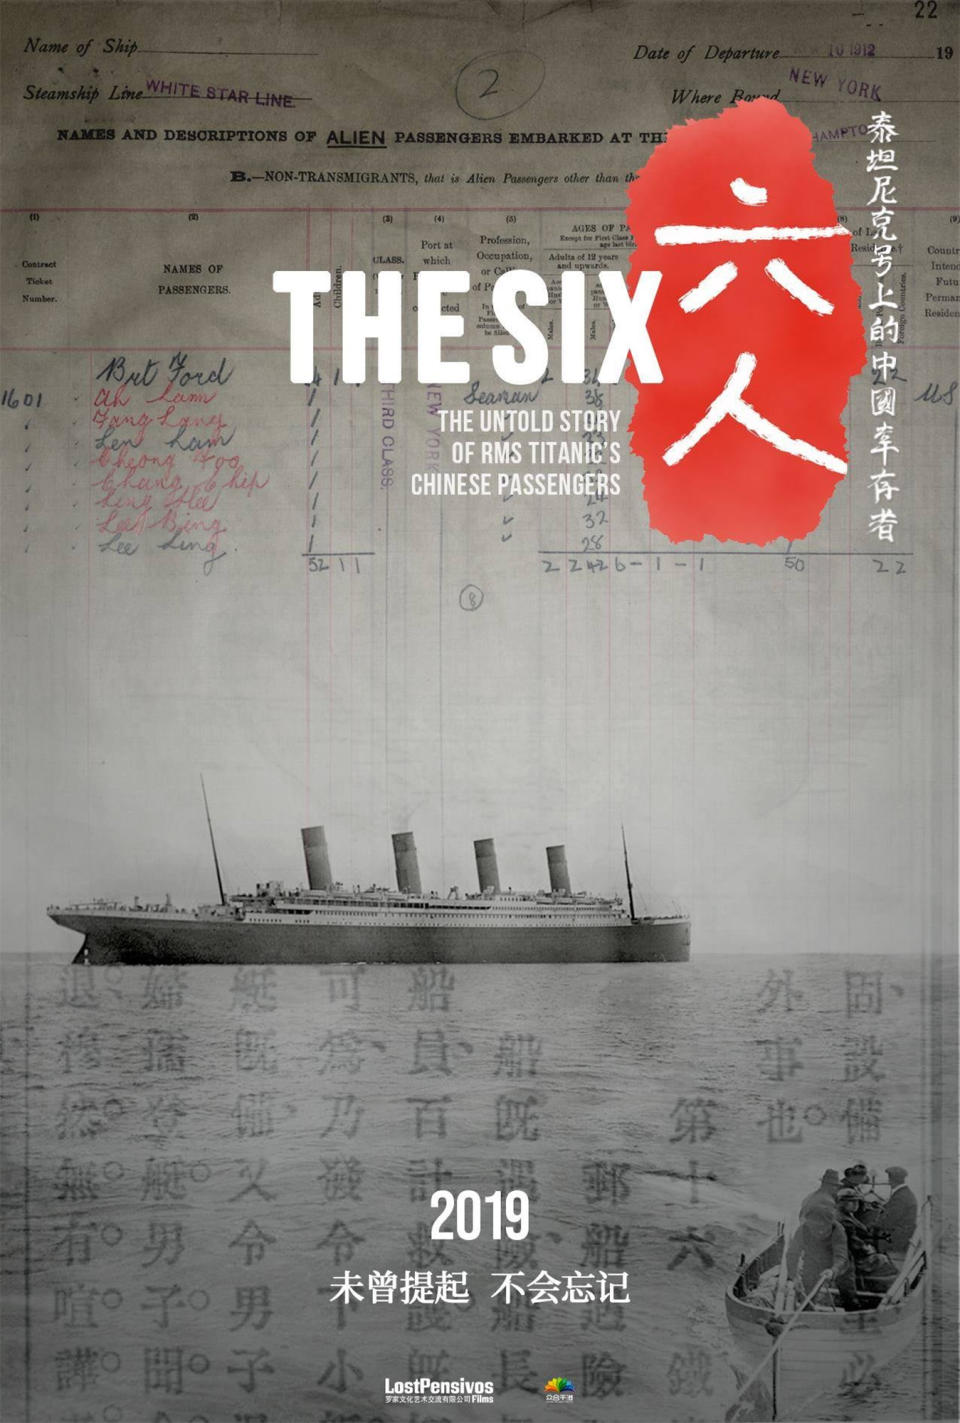 Image: The Six movie poster (Facebook/The Six)